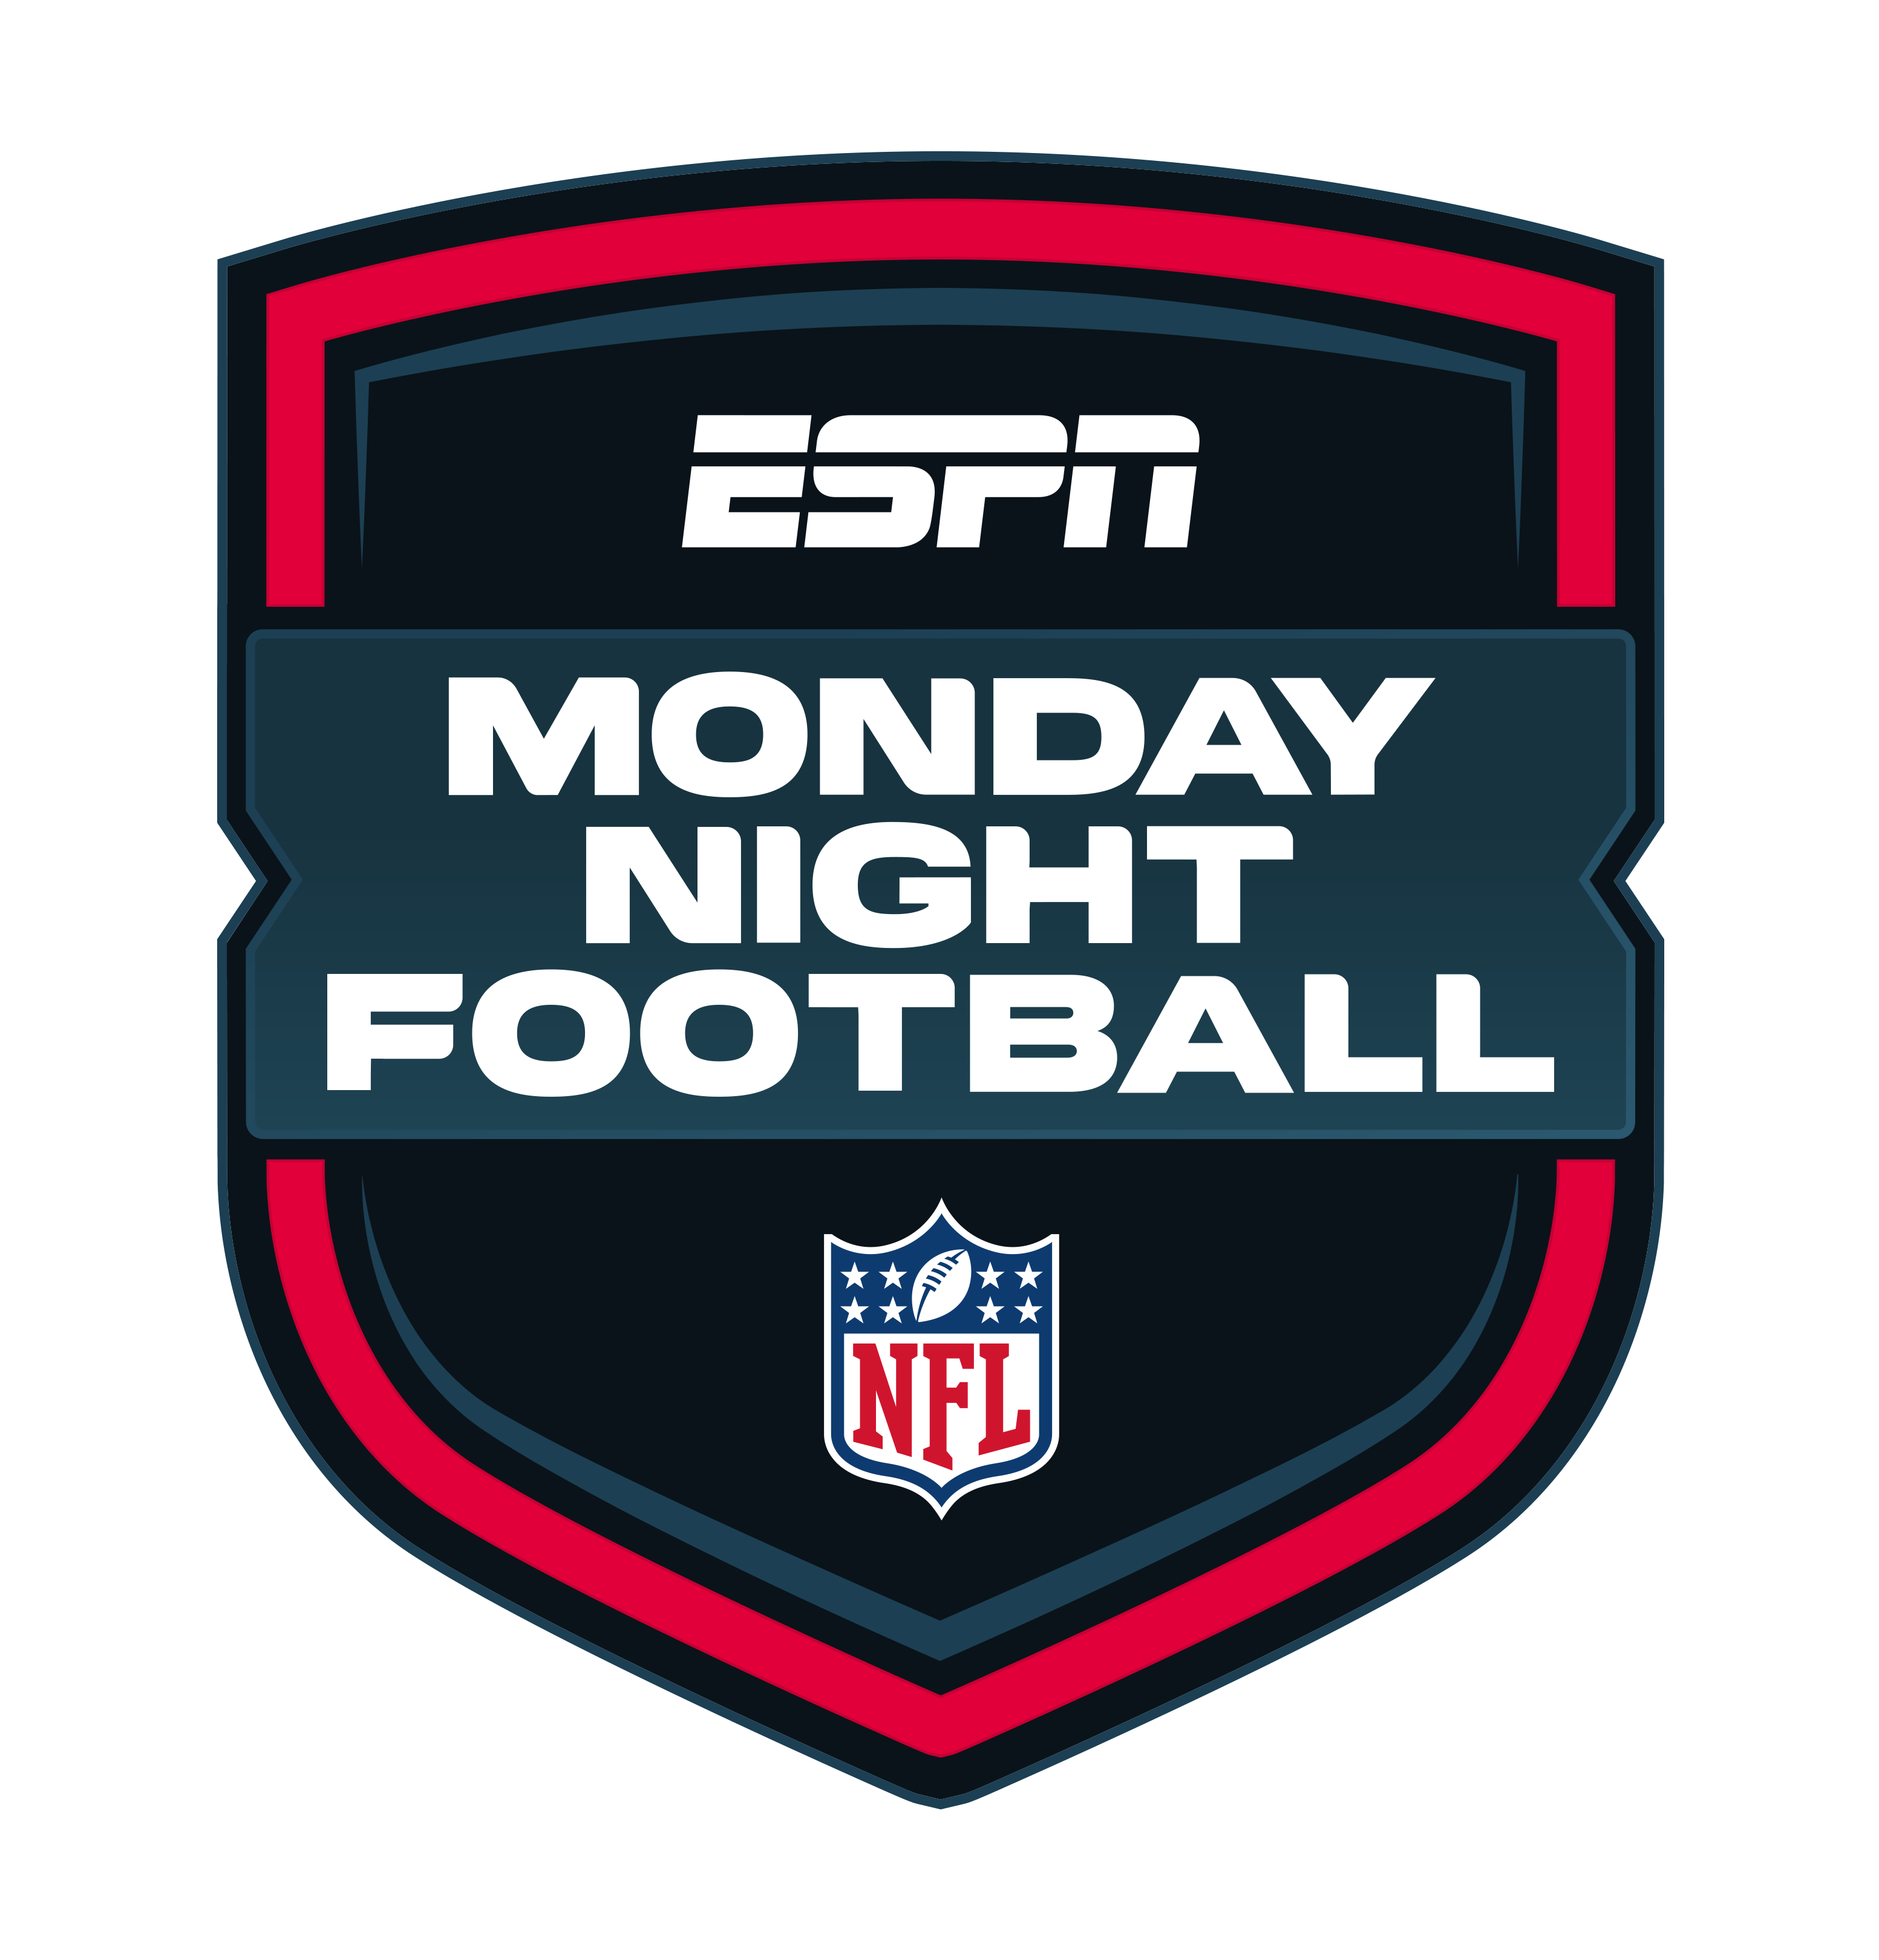 Hard to home in on the hows and whys of 'Monday Night Football'